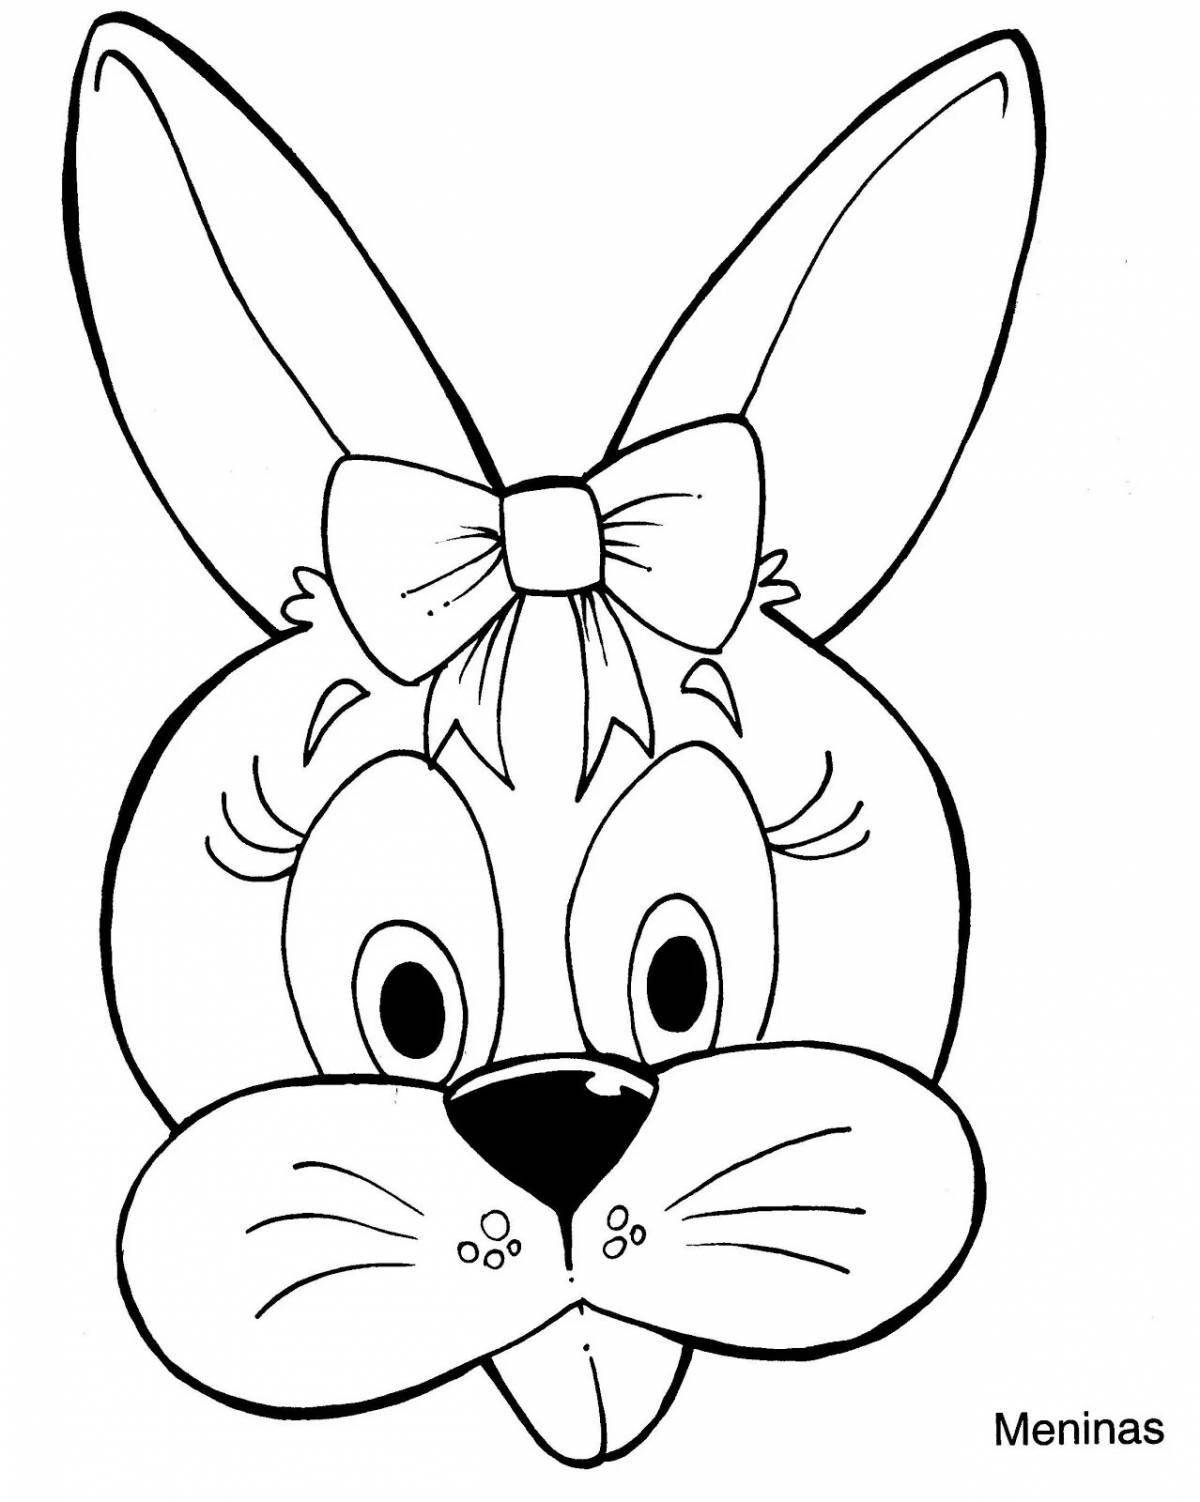 Coloring book wild muzzle of a hare